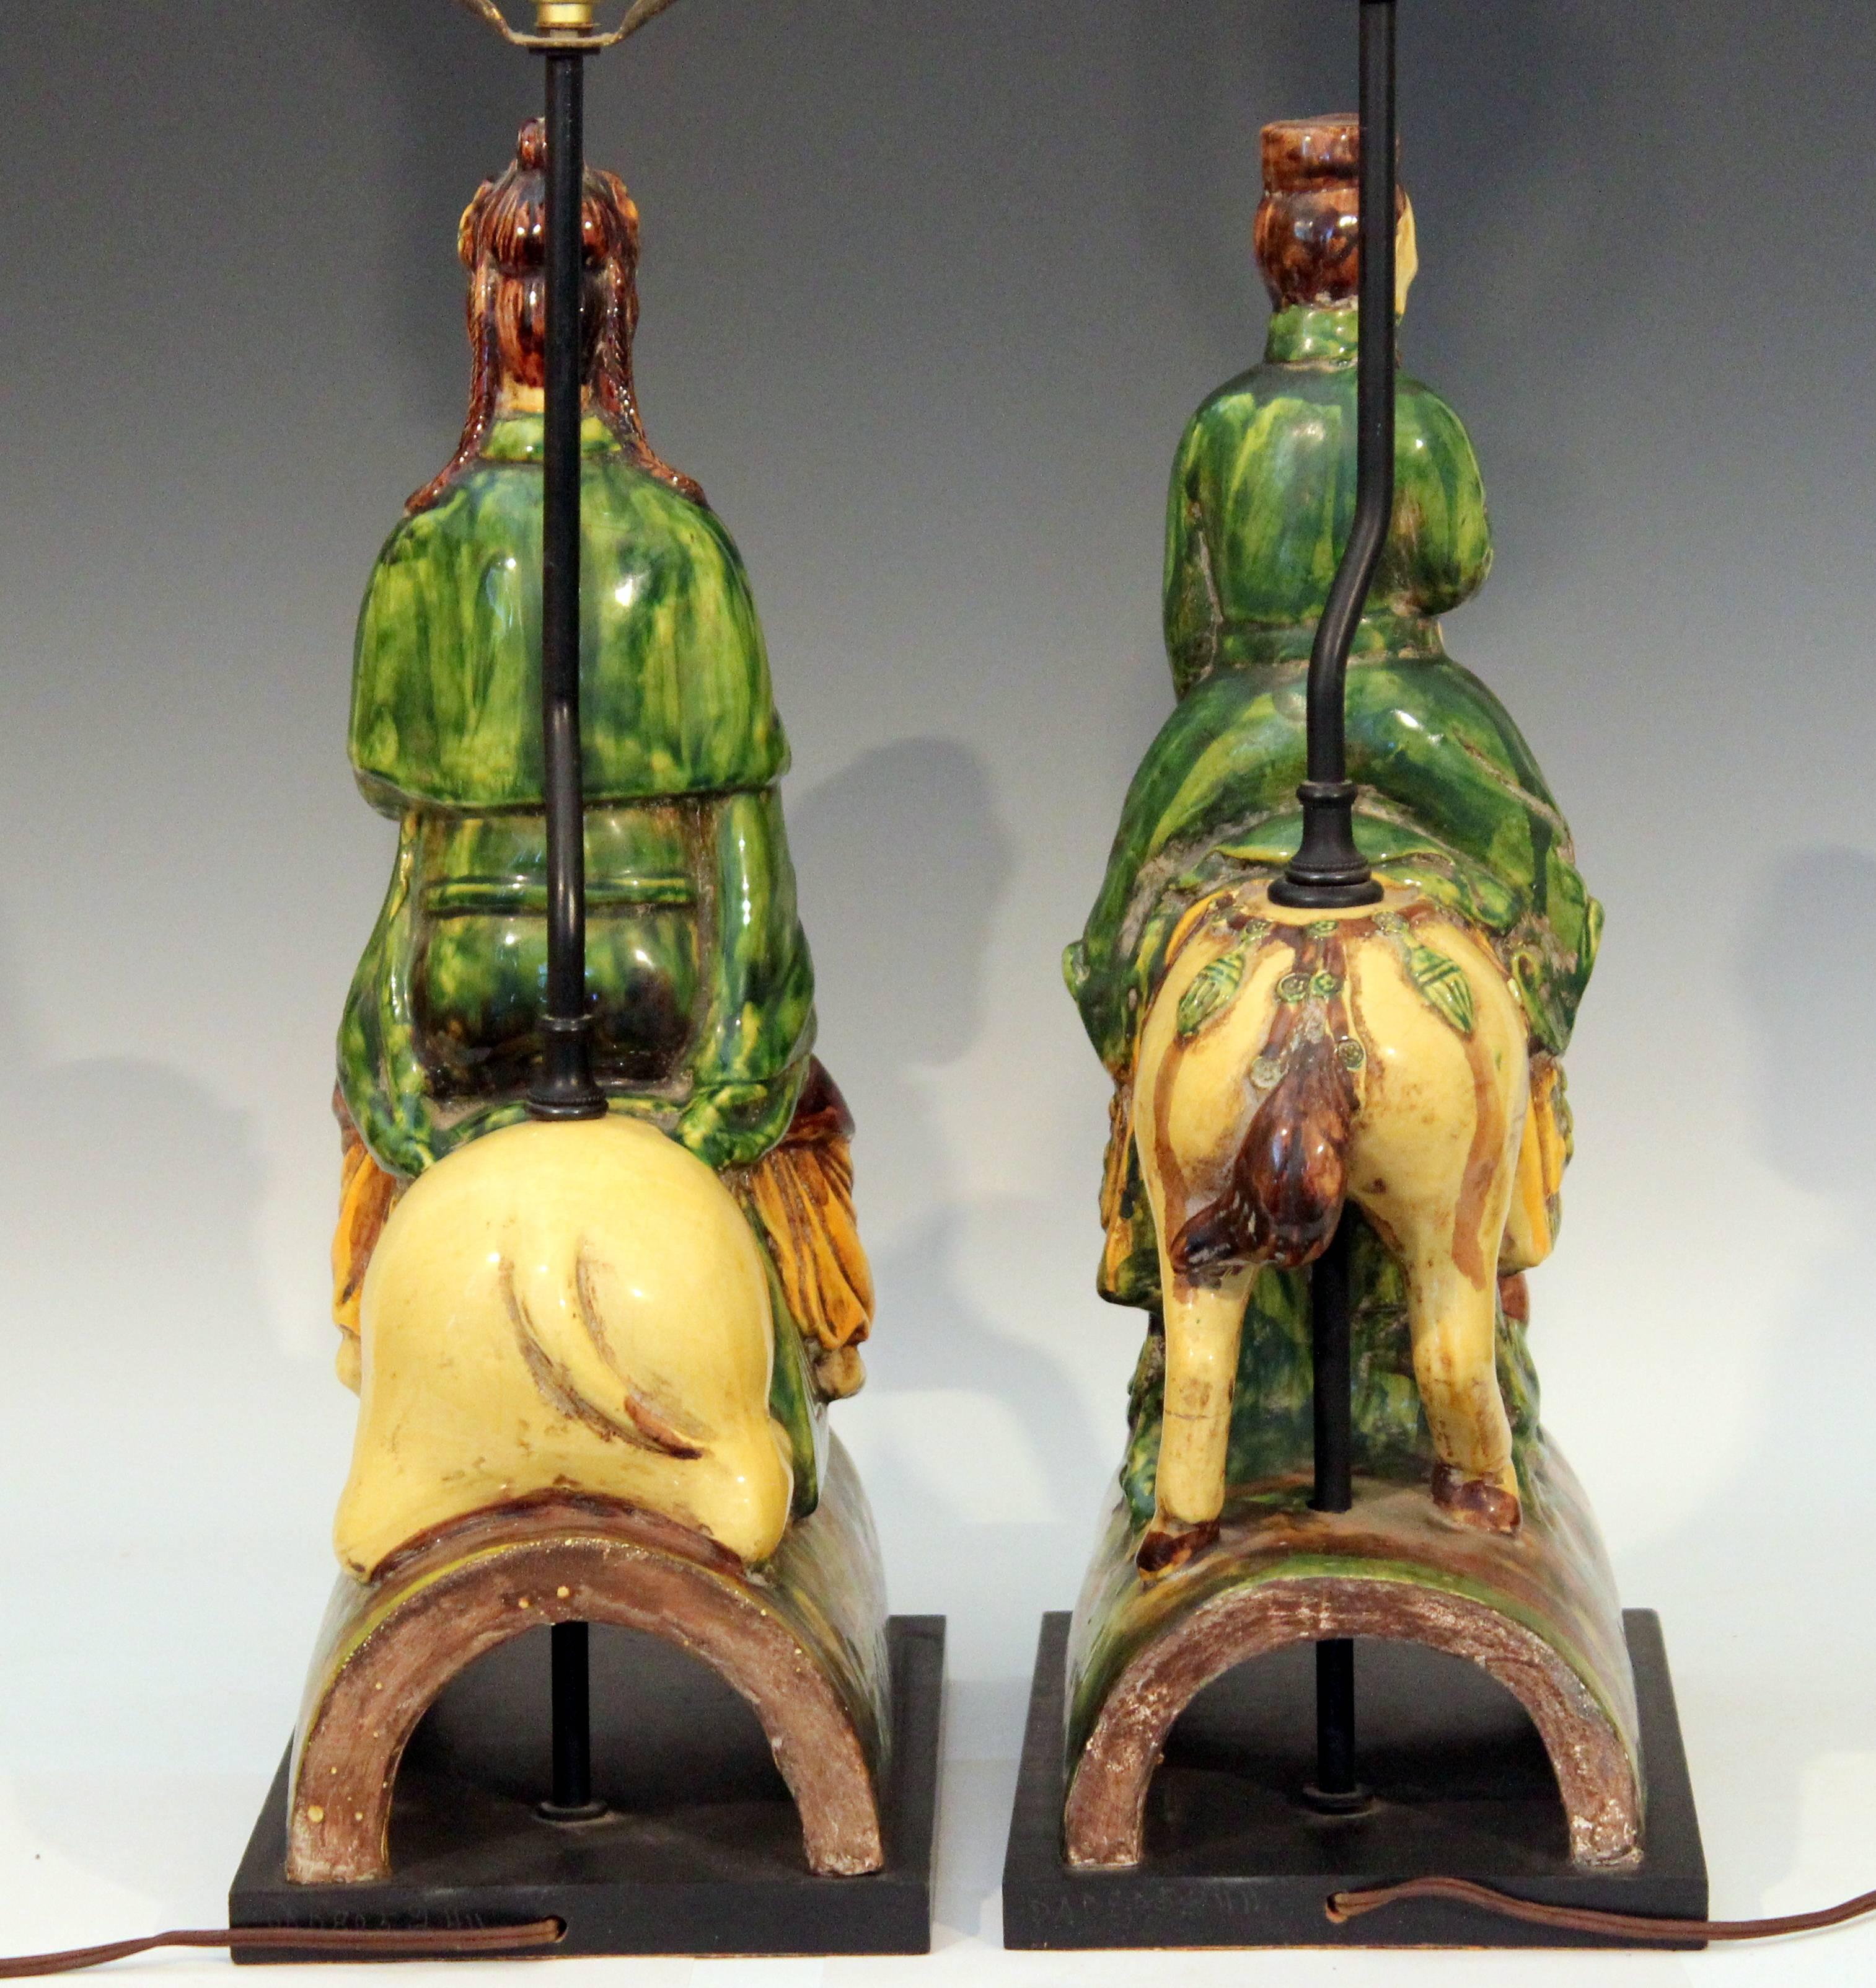 Pottery Pair of Zaccagnini Guanyin Buddha Figures Vintage Italian Ming Roof Tile Lamps